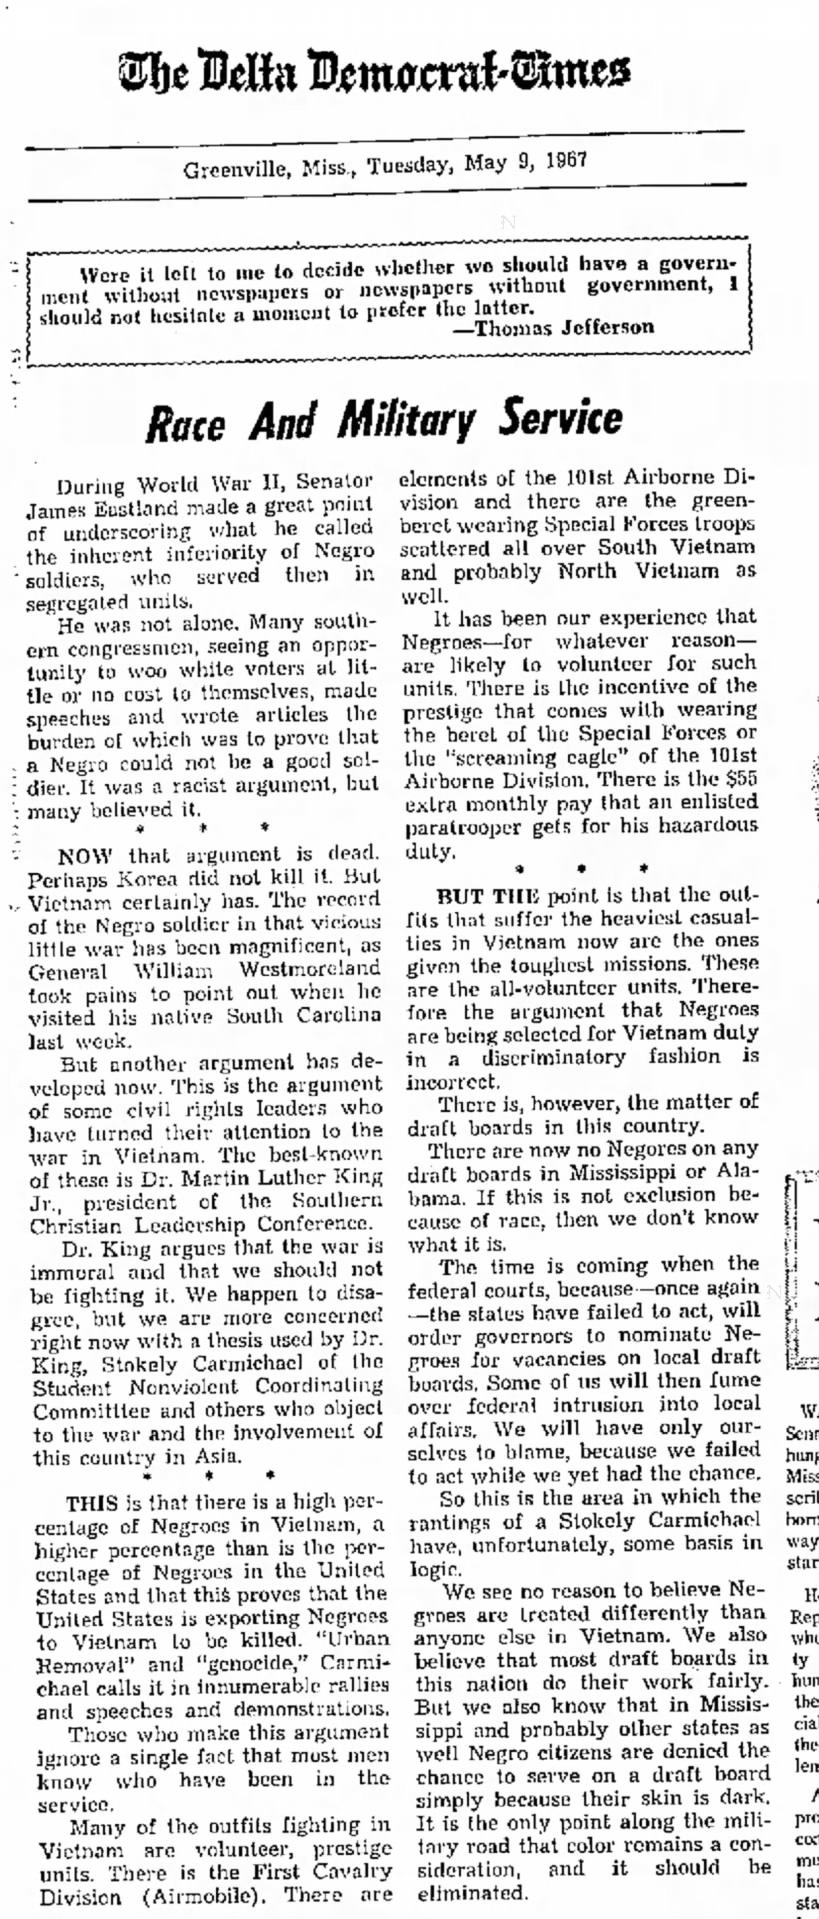 the delta Democrat-times (greenville, Miss) 9 May 1967